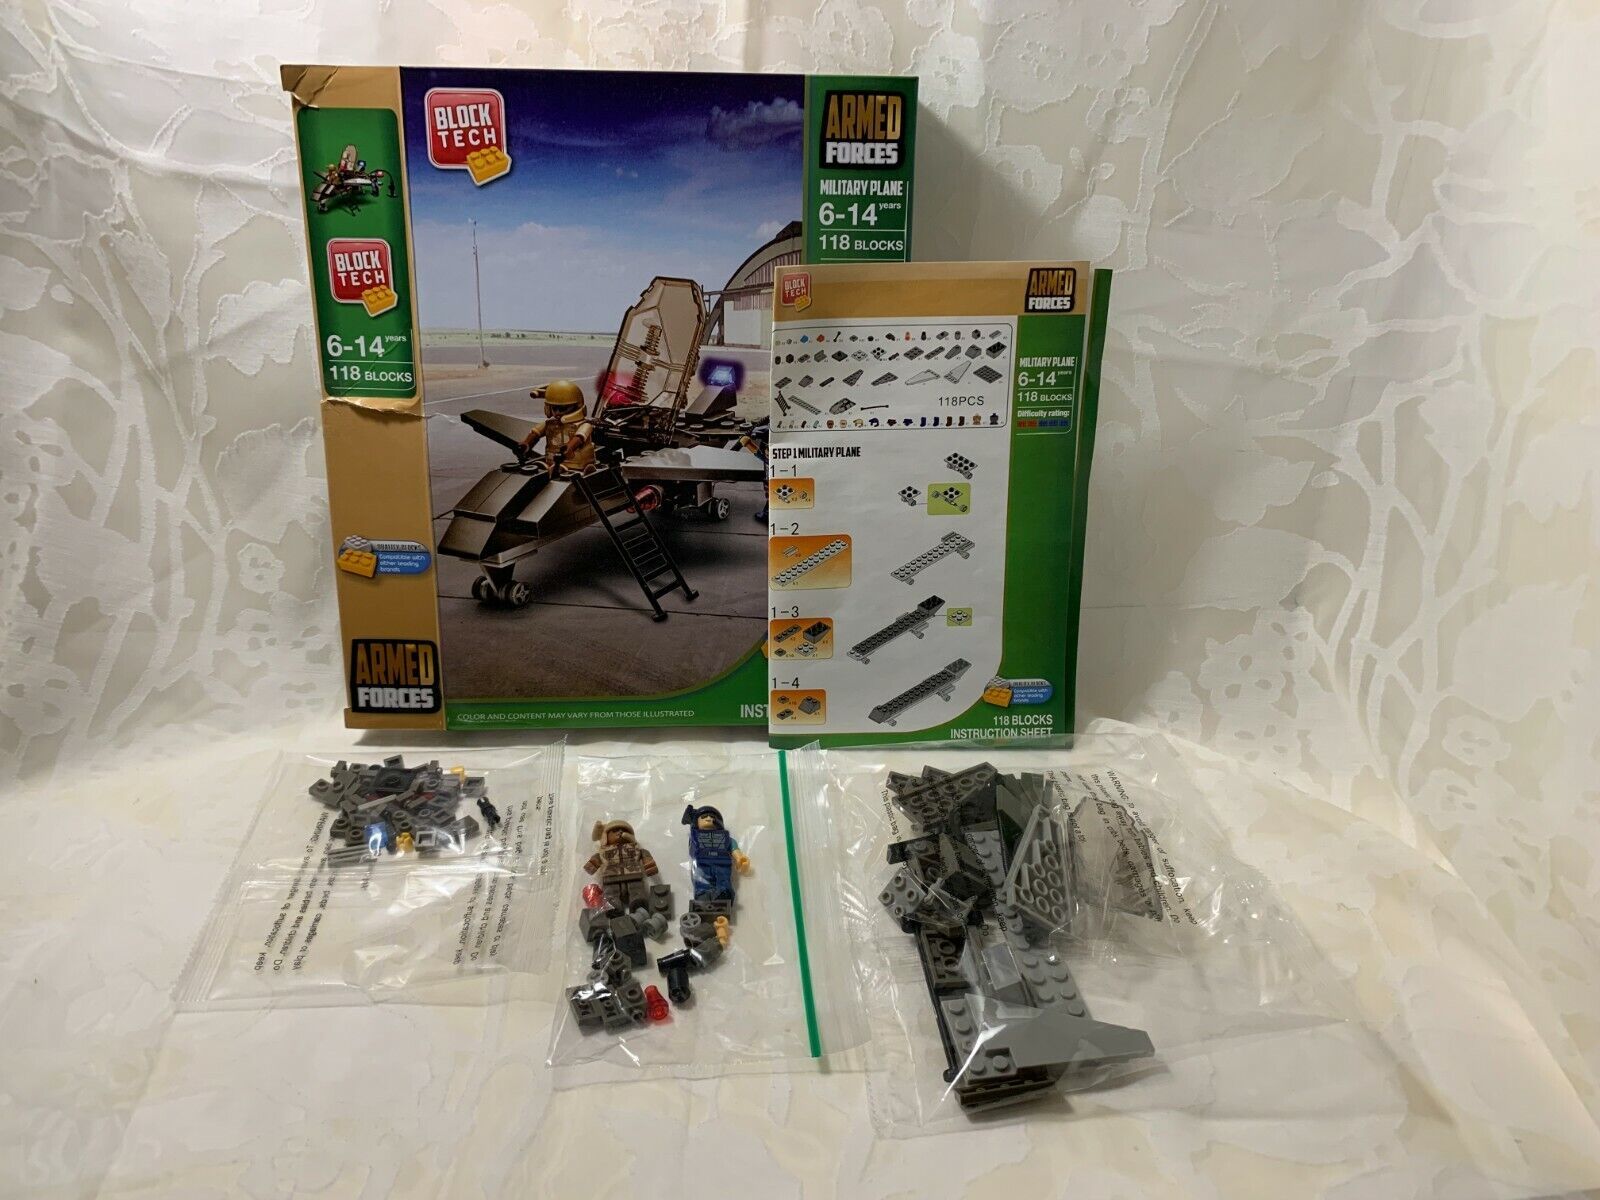 Primary image for Block Tech Armed Forces Military Plane Building Blocks Jet Fighter & Pilot